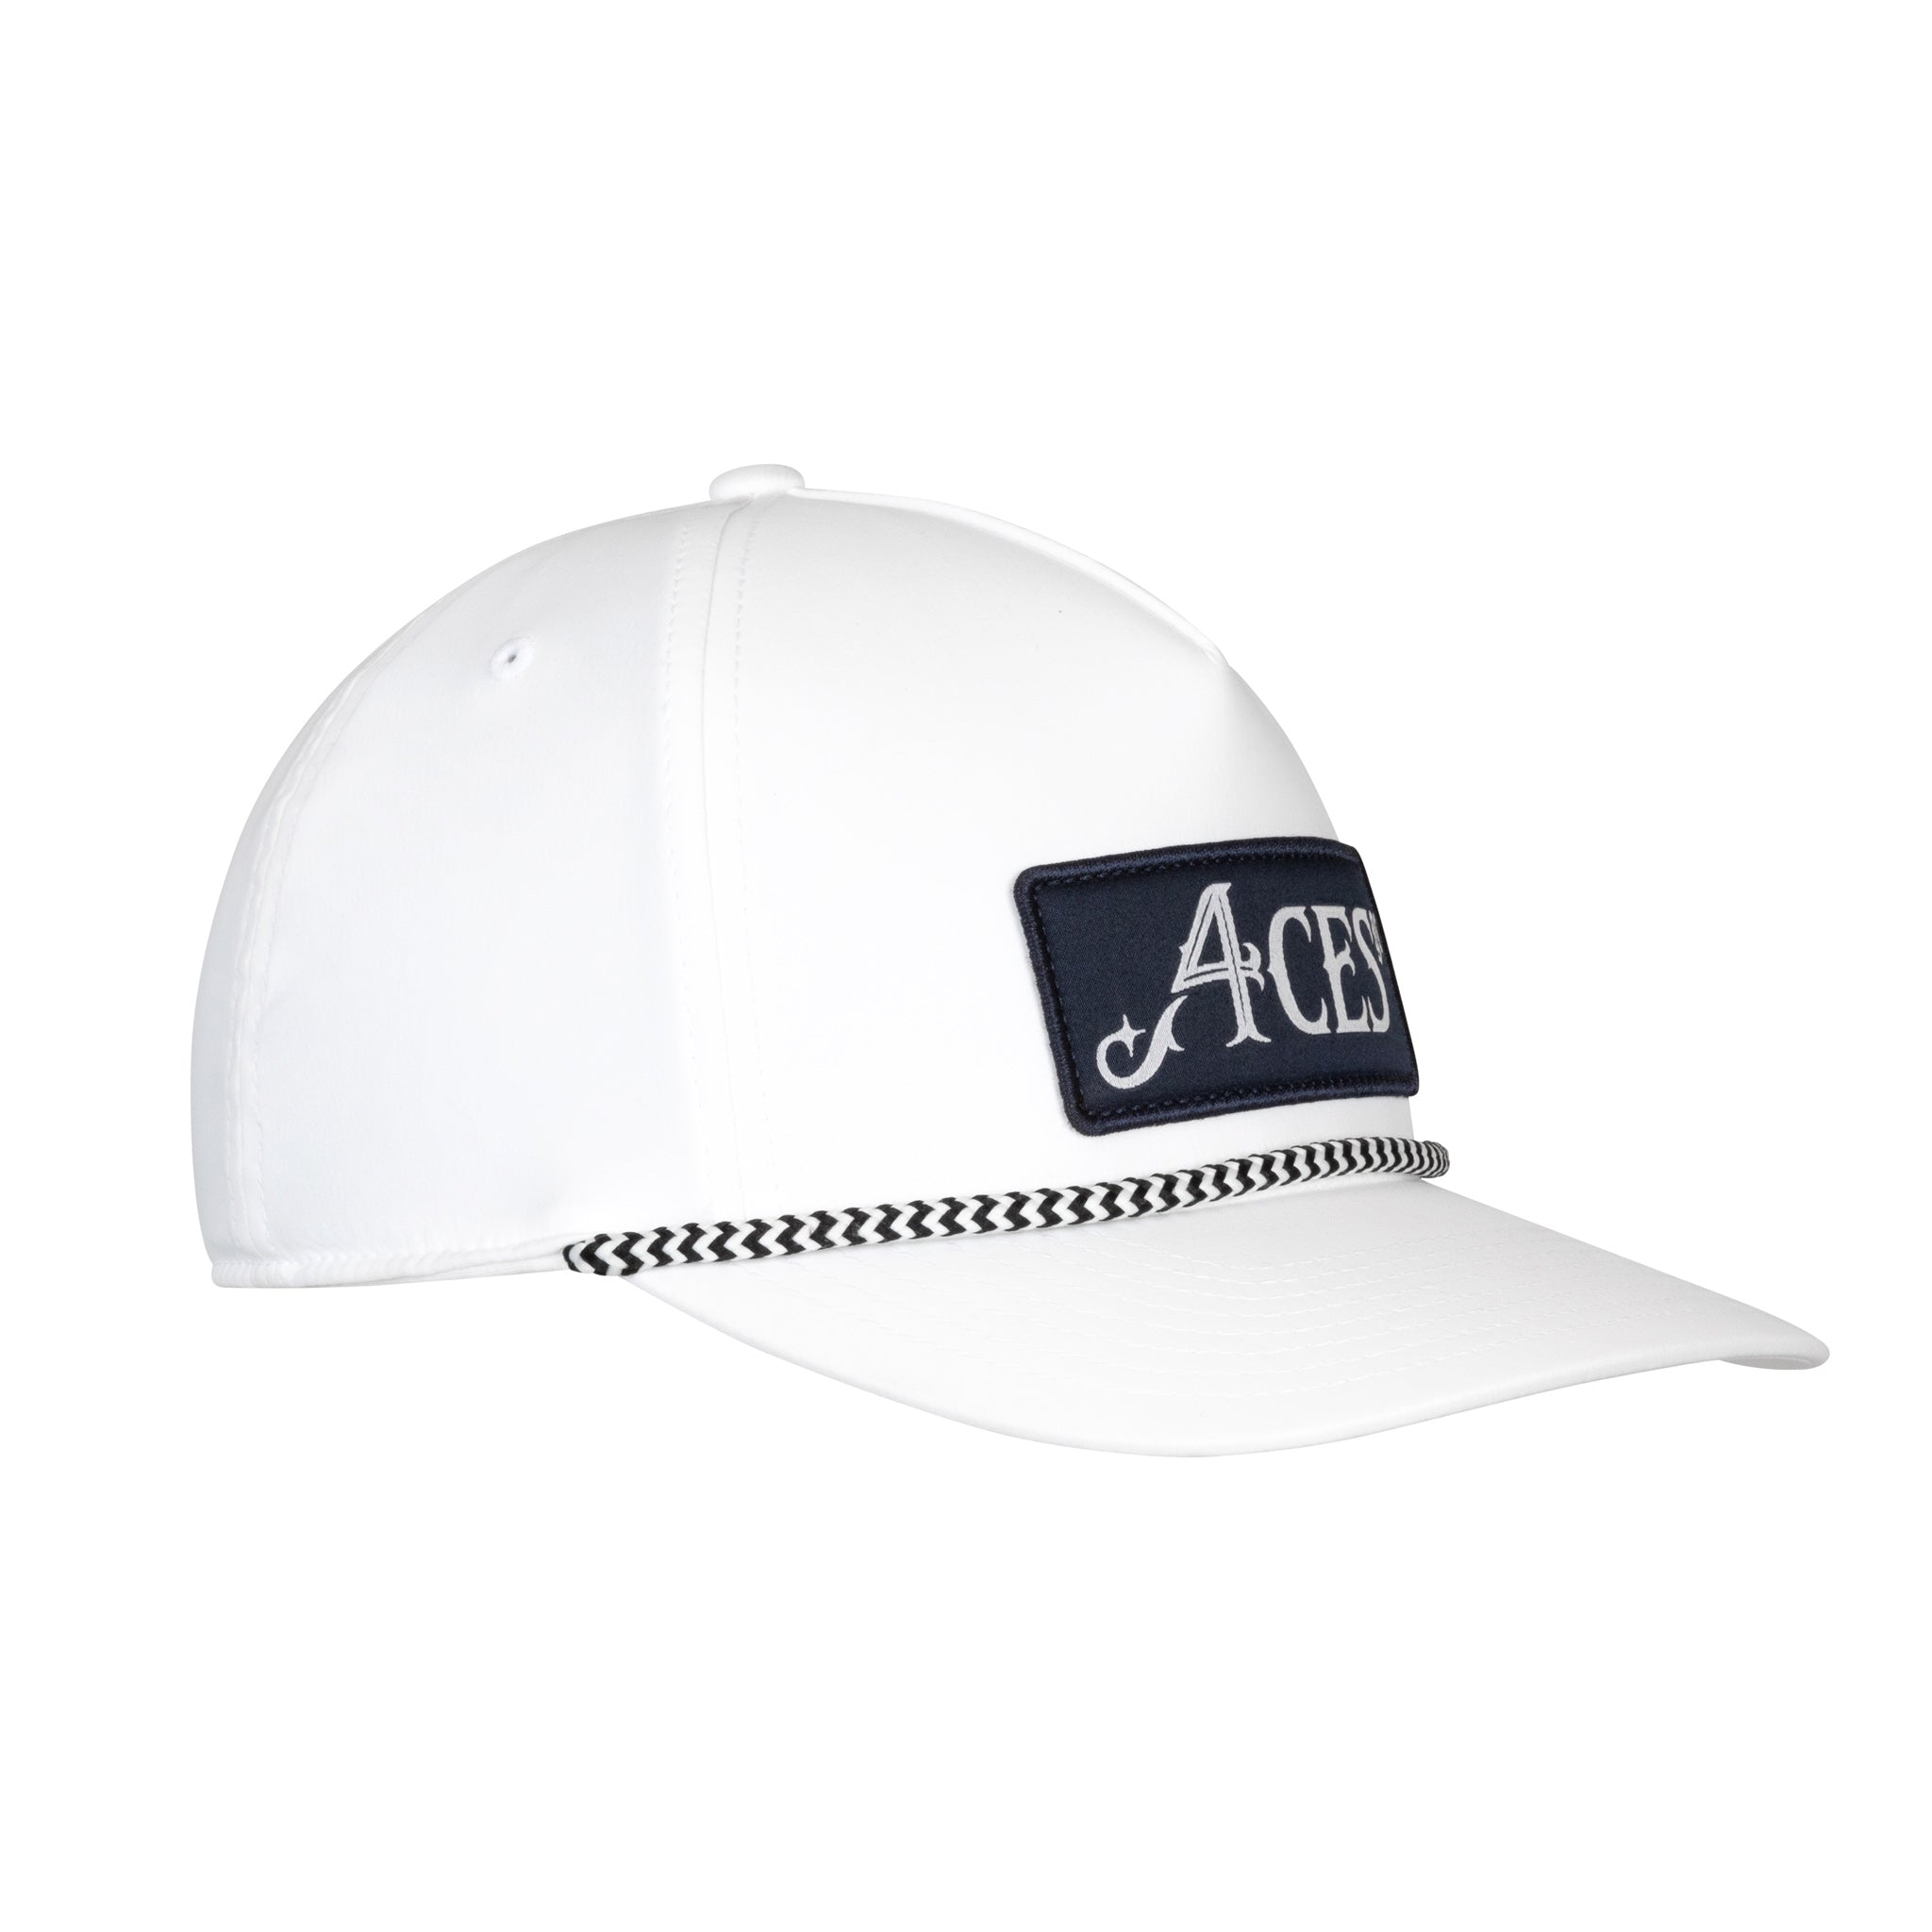 4ACES GC TEAM PATCH HAT | BRIGHT WHITE